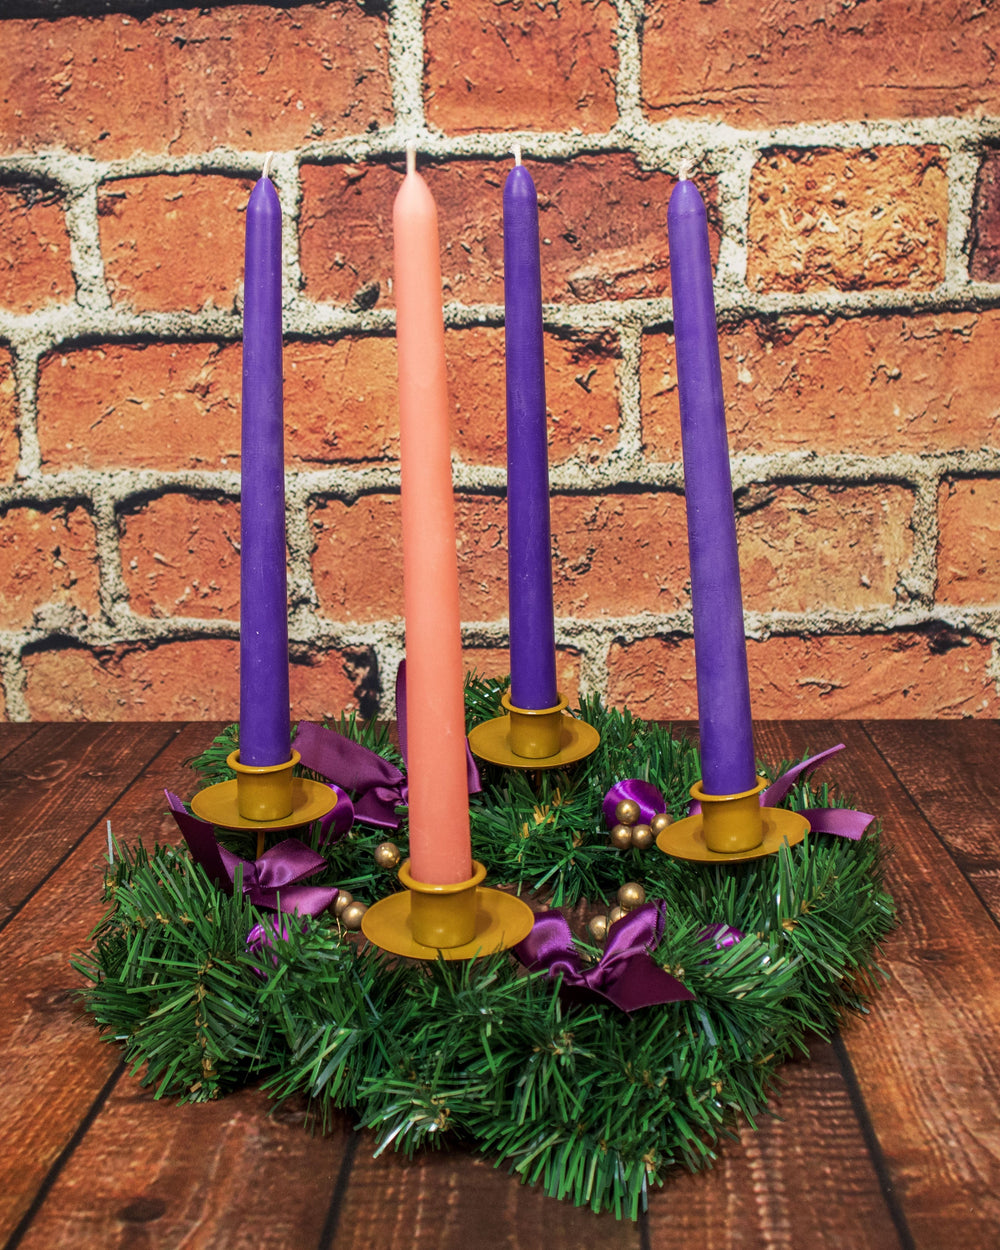 Introducing Advent Candles